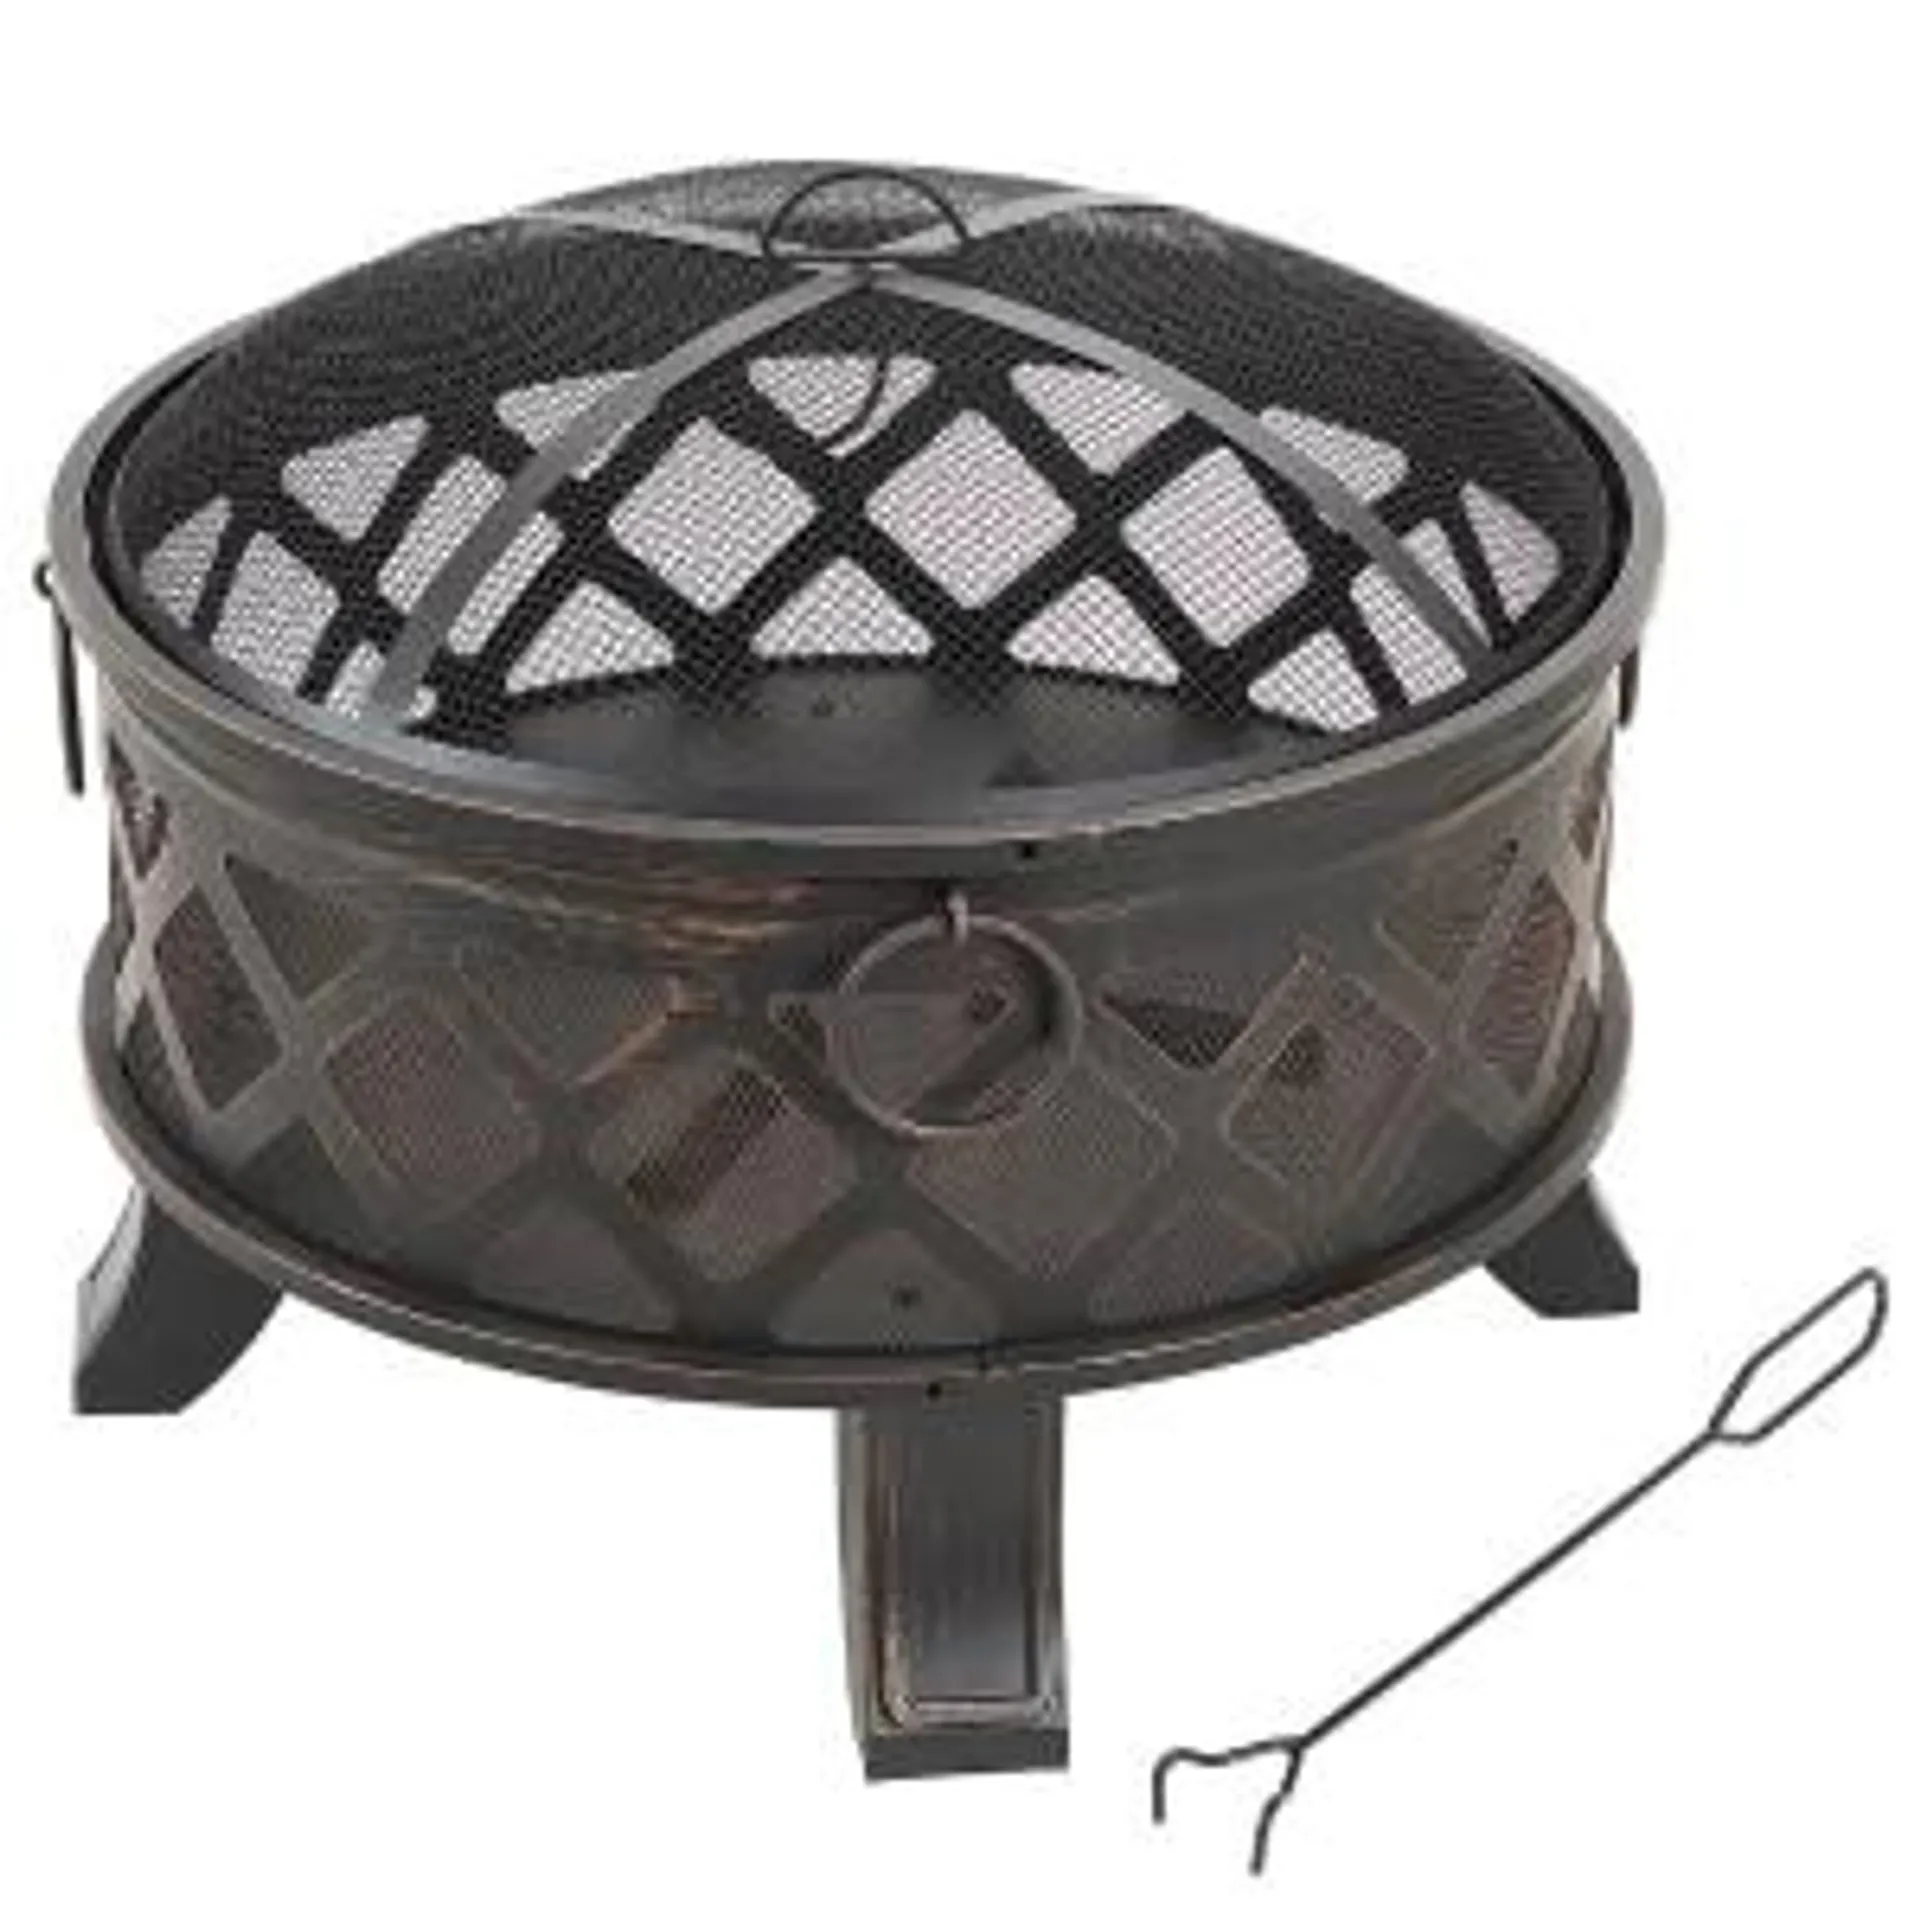 Outdoor Living Accents Deep Bowl Fire Pit, 26"